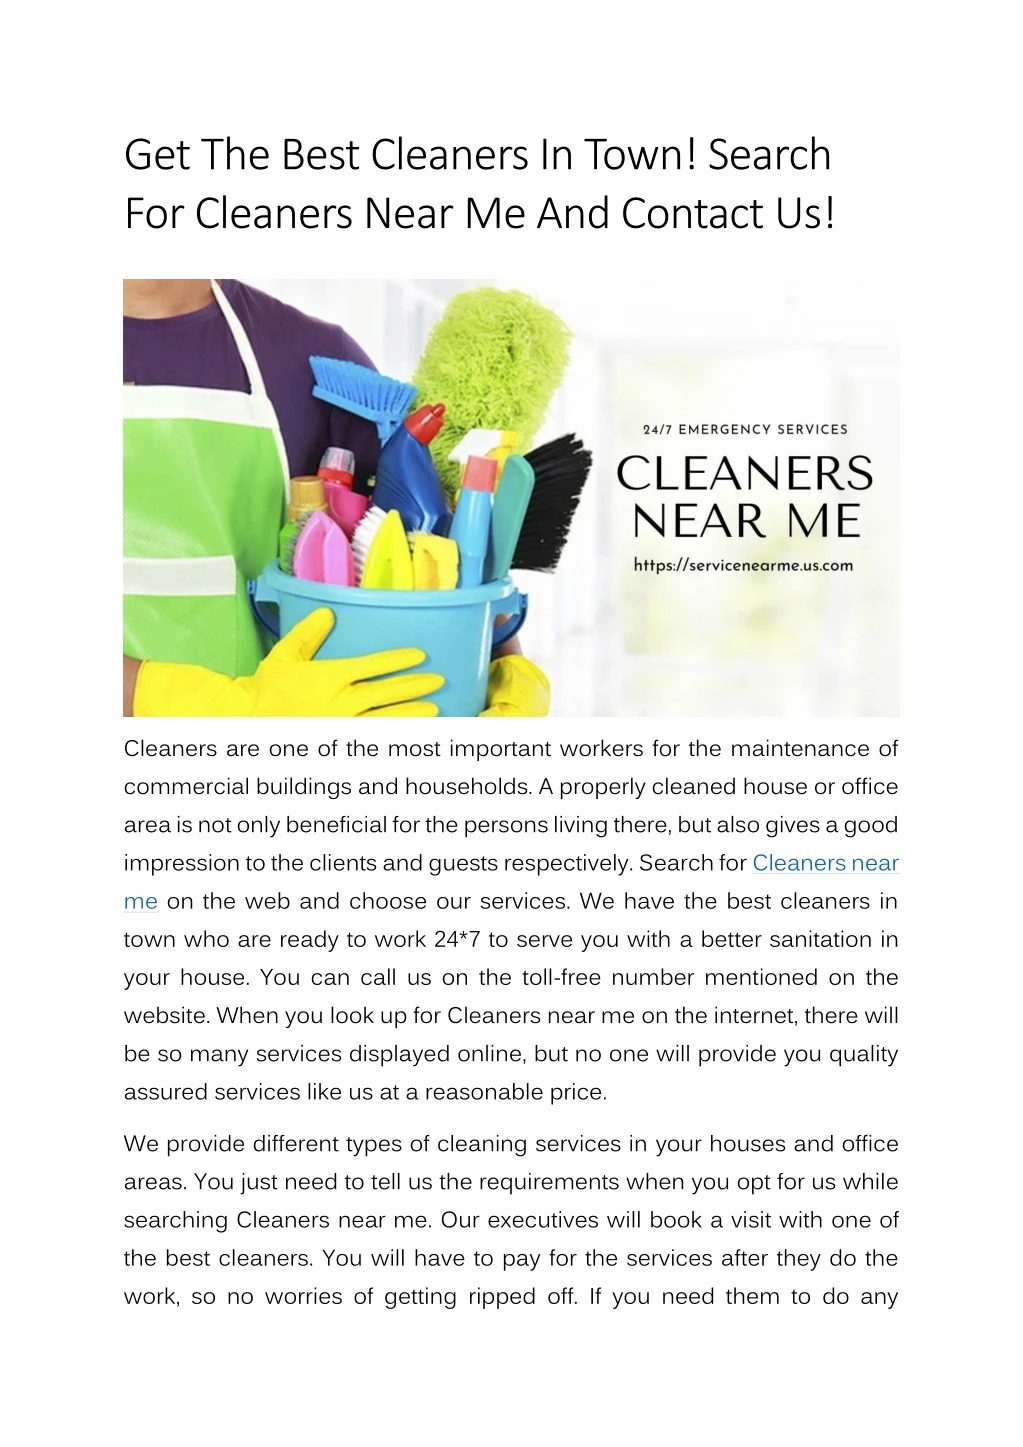 get the best cleaners in town search for cleaners